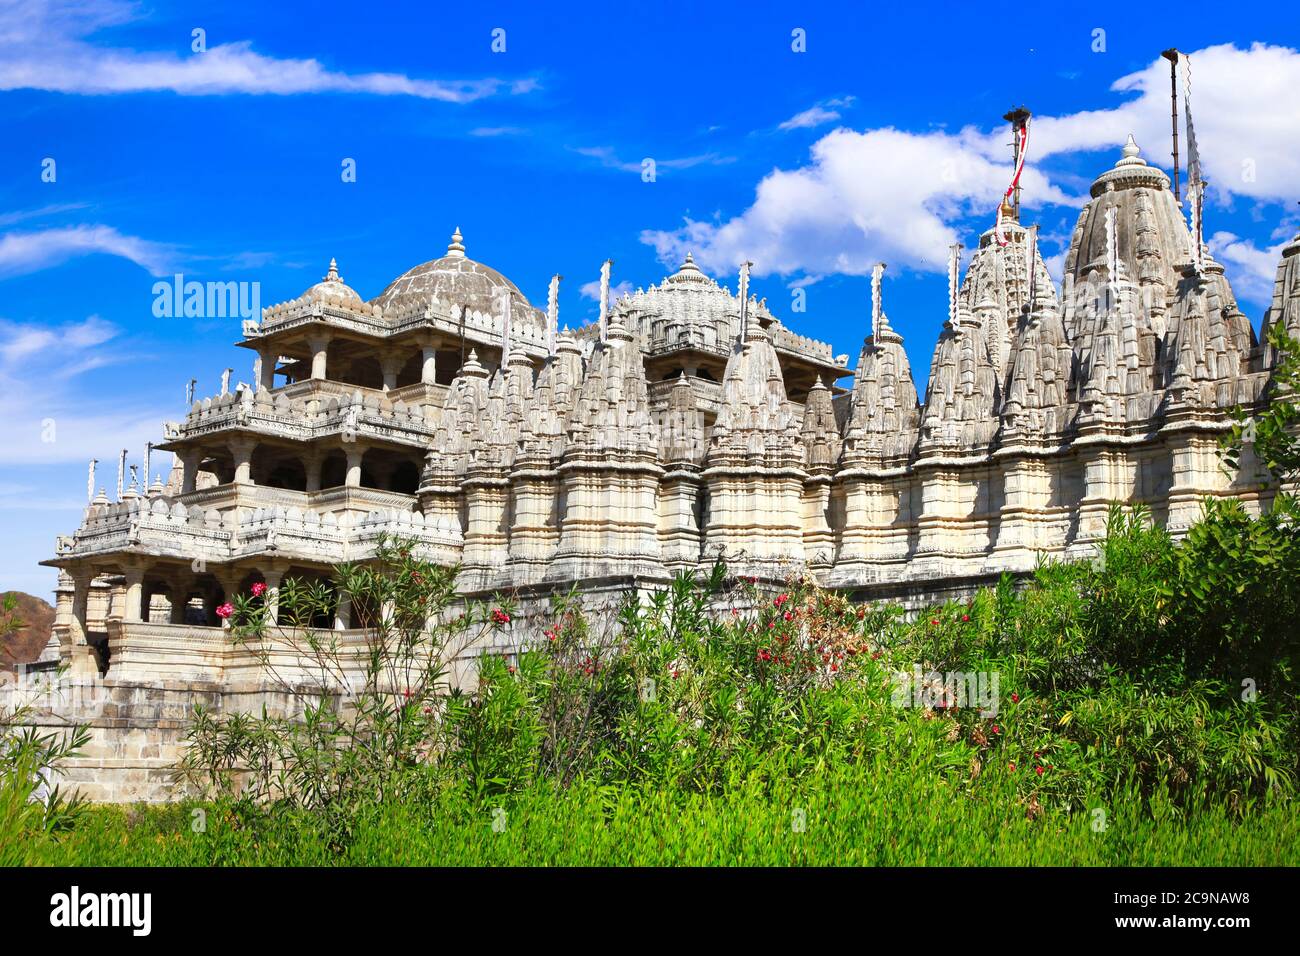 Ranakpur Temple is one of the largest and most important temples in Jain culture. Rajasthan, India Stock Photo